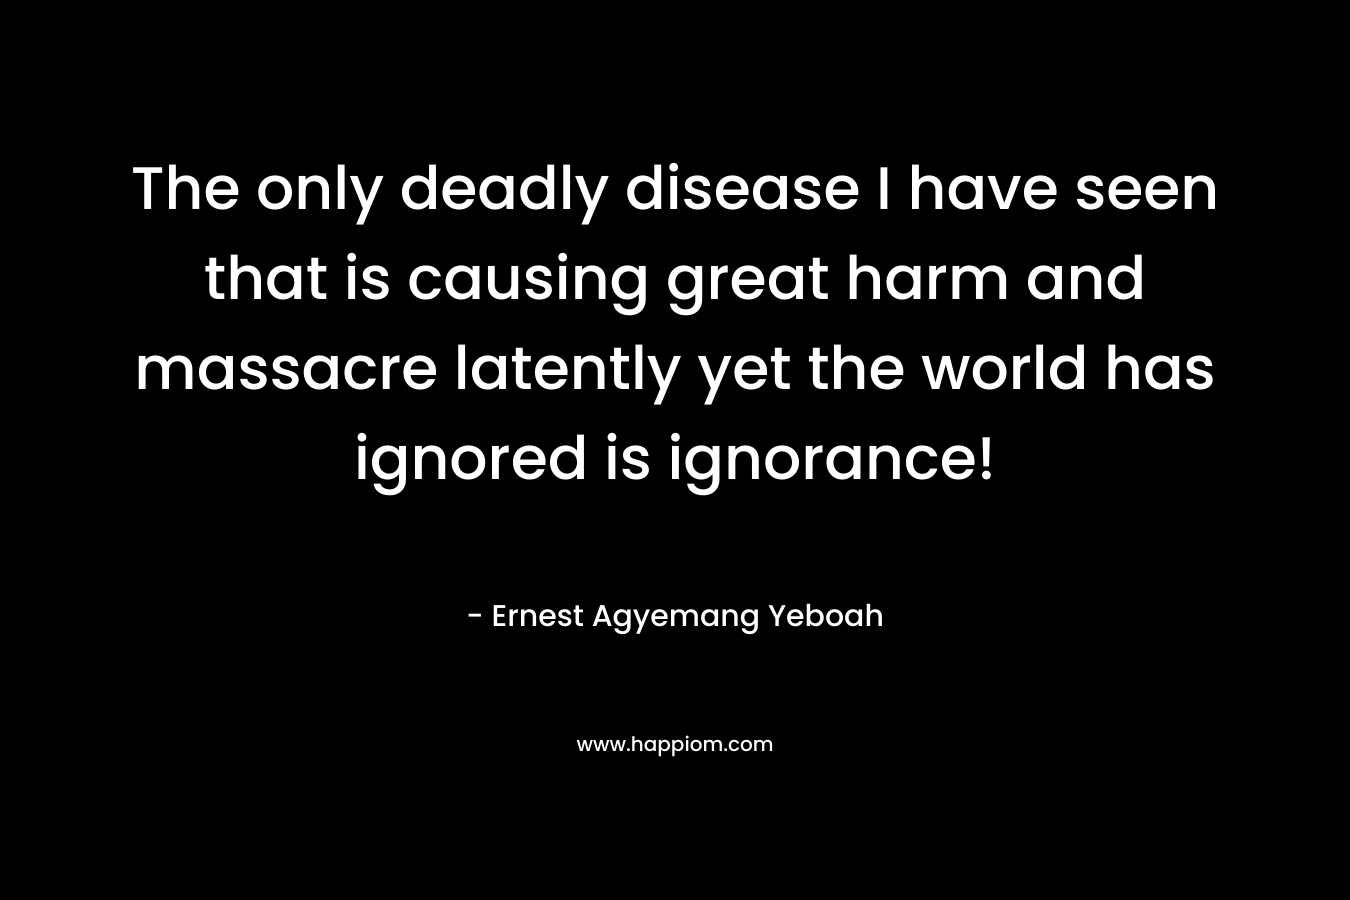 The only deadly disease I have seen that is causing great harm and massacre latently yet the world has ignored is ignorance! – Ernest Agyemang Yeboah